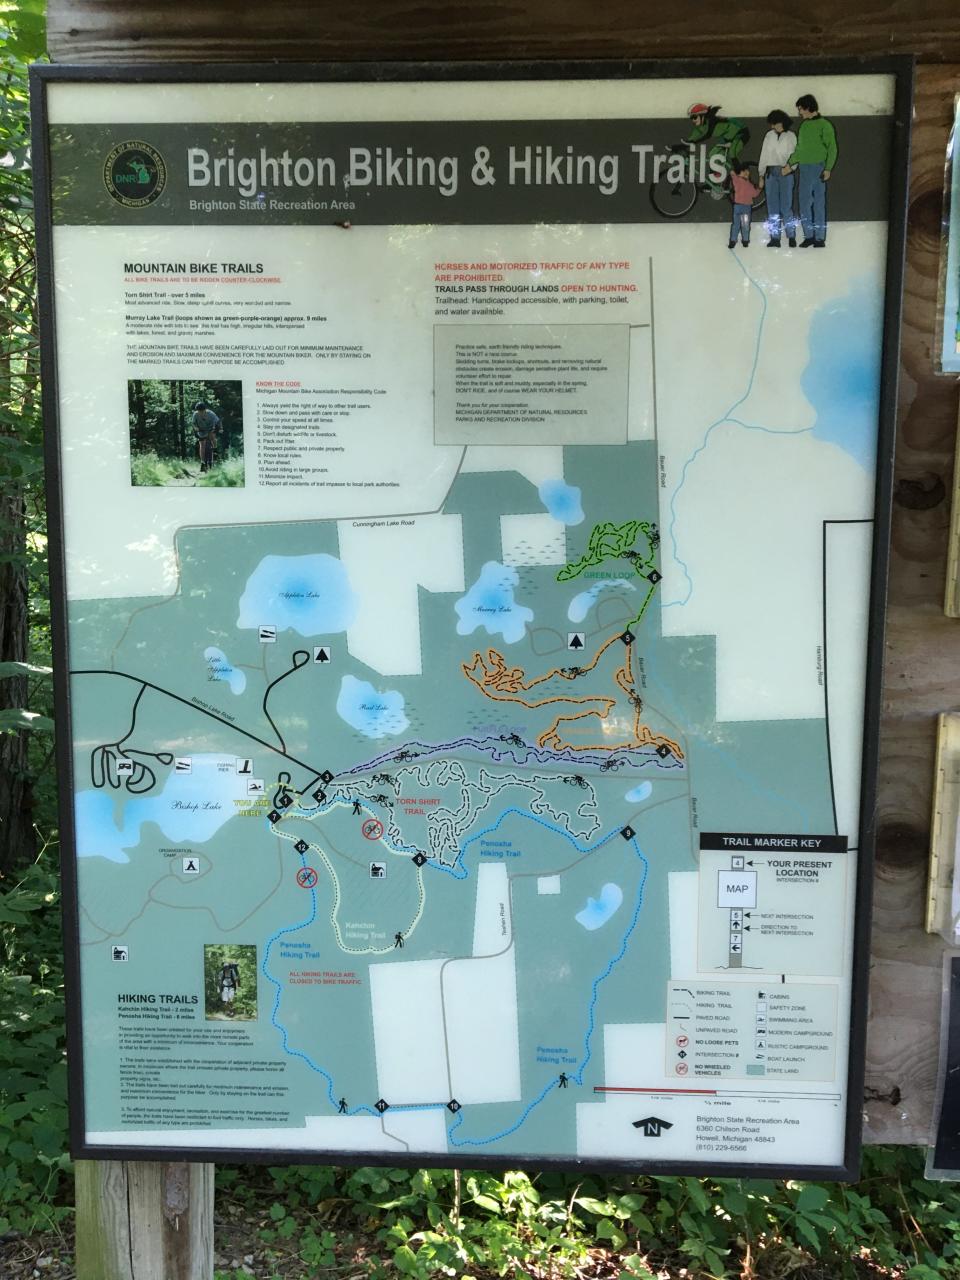 There is a map of the mountain bike and hiking trails at the trailhead of Brighton Recreation Area.